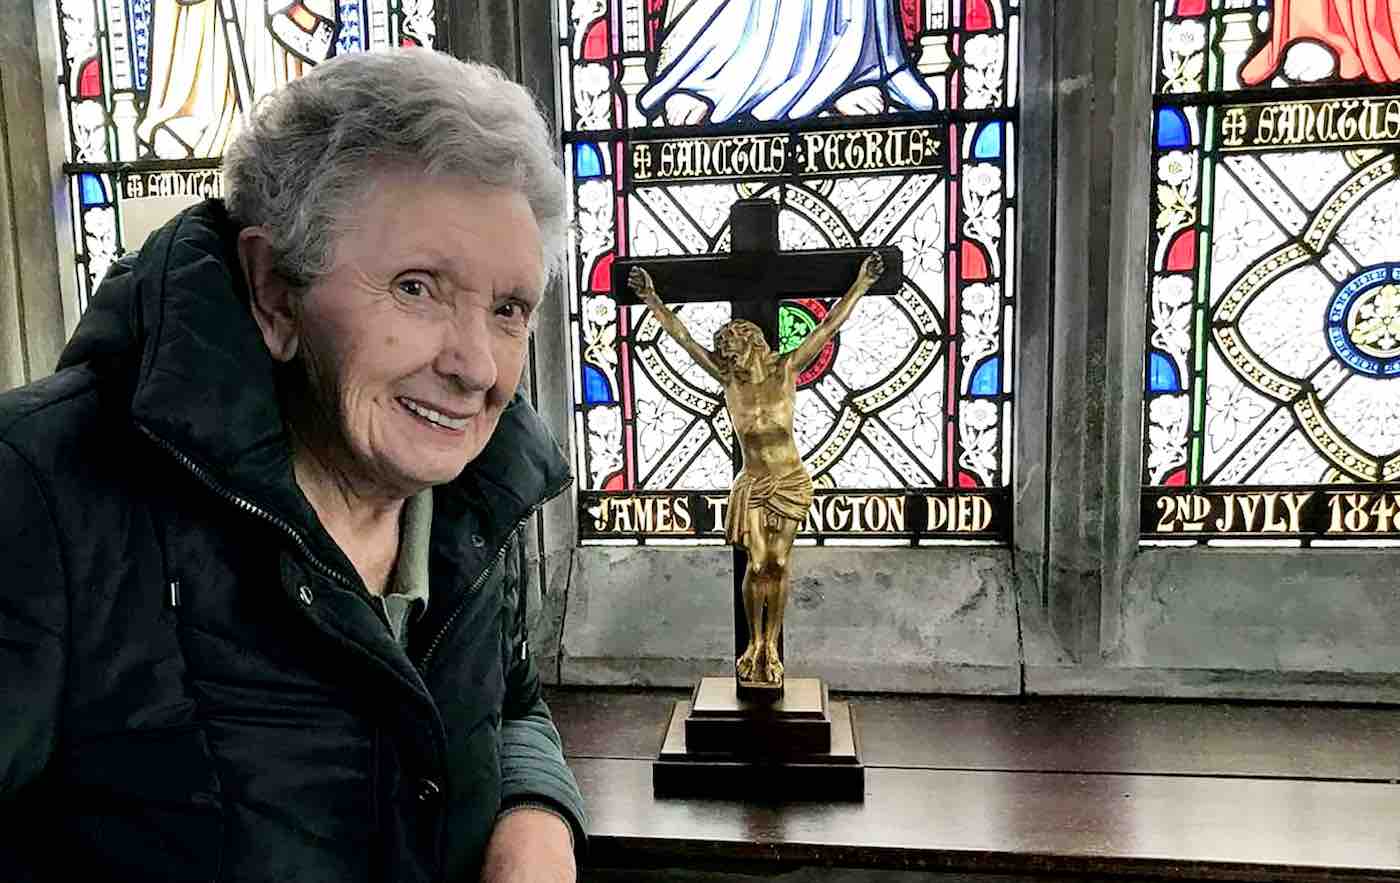 https://www.goodnewsnetwork.org/wp-content/uploads/2023/04/church-crucifix-with-older-woman-SWNS.jpg